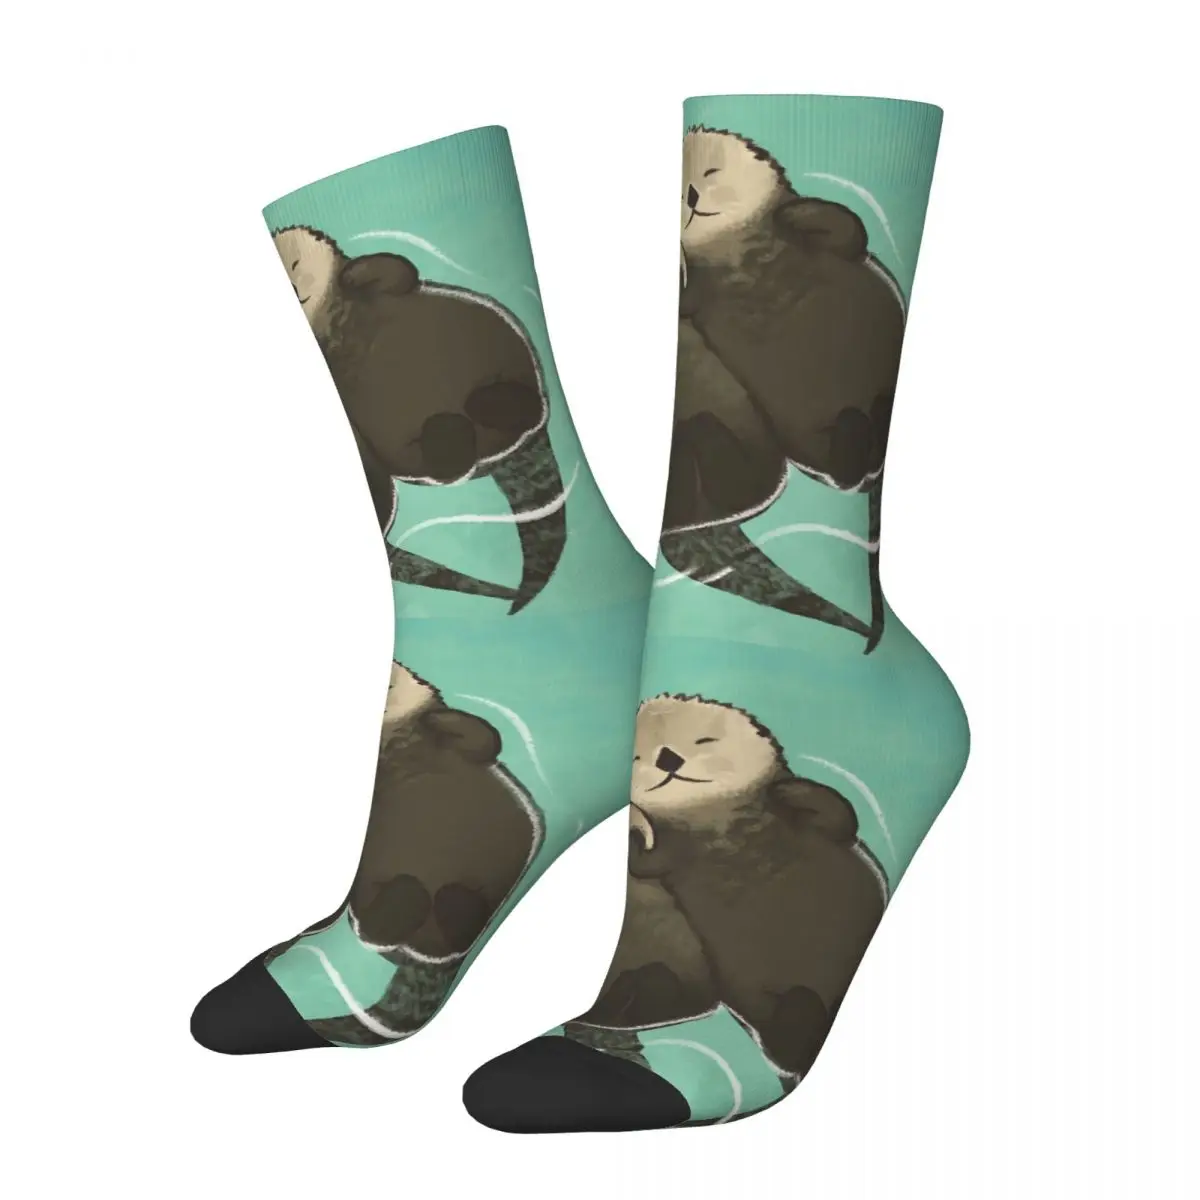 

Funny Happy Men's Socks Significant Otters Holding Hands Vintage Harajuku Culture Hip Hop Novelty Casual Crew Crazy Sock Printed